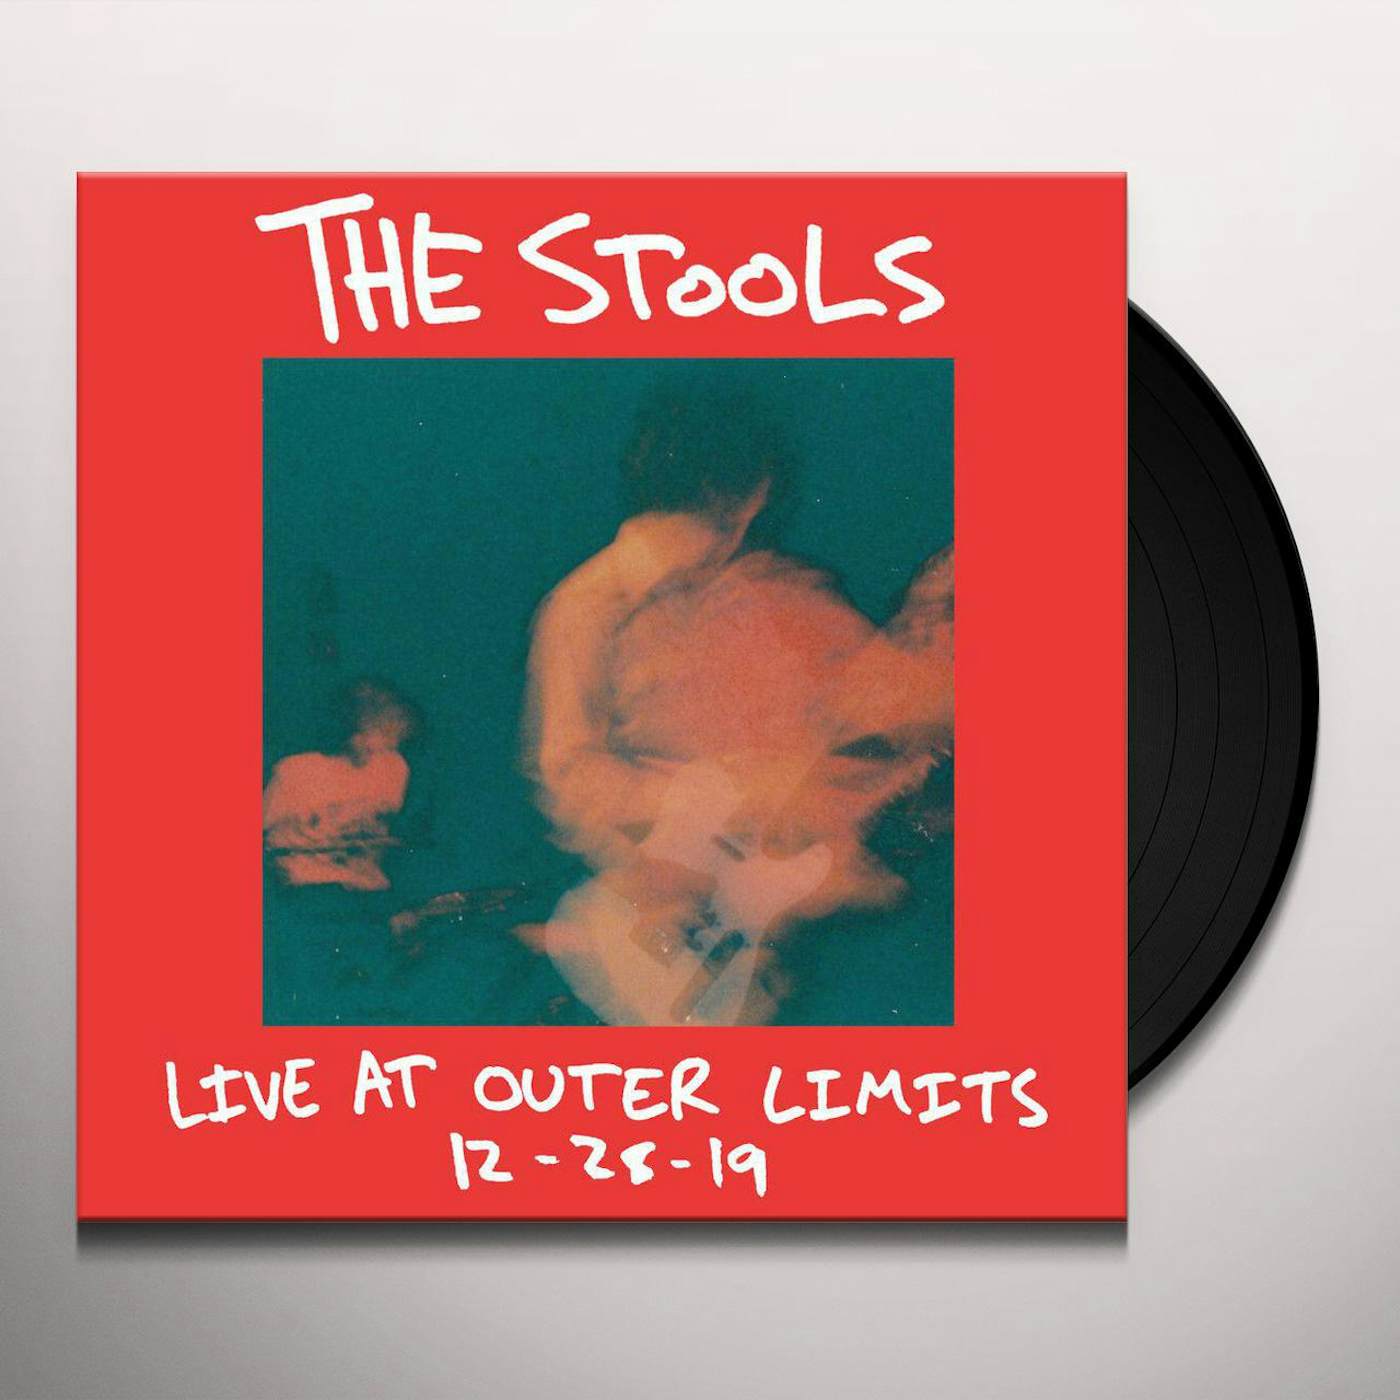 The Stools LIVE AT OUTER LIMITS 12-28-19 Vinyl Record